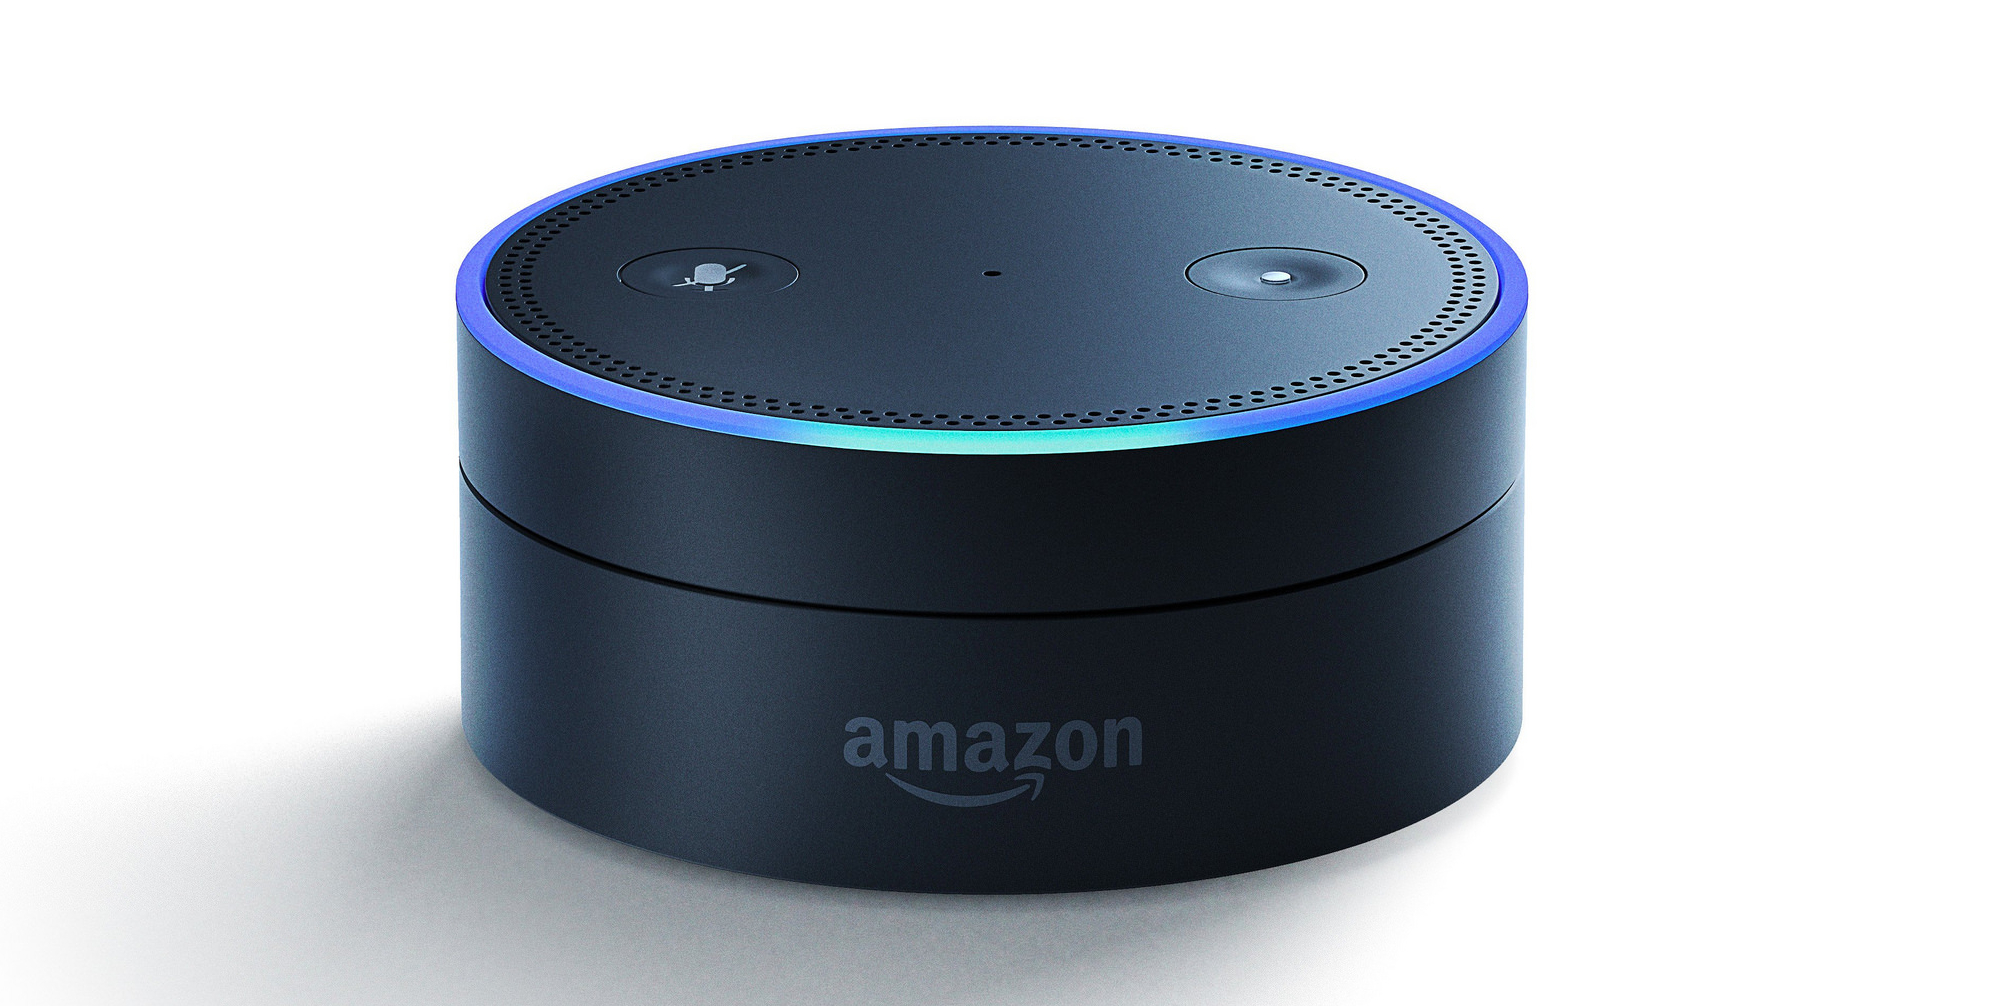 12 Alexa skills you must have for your Amazon Echo (with video)